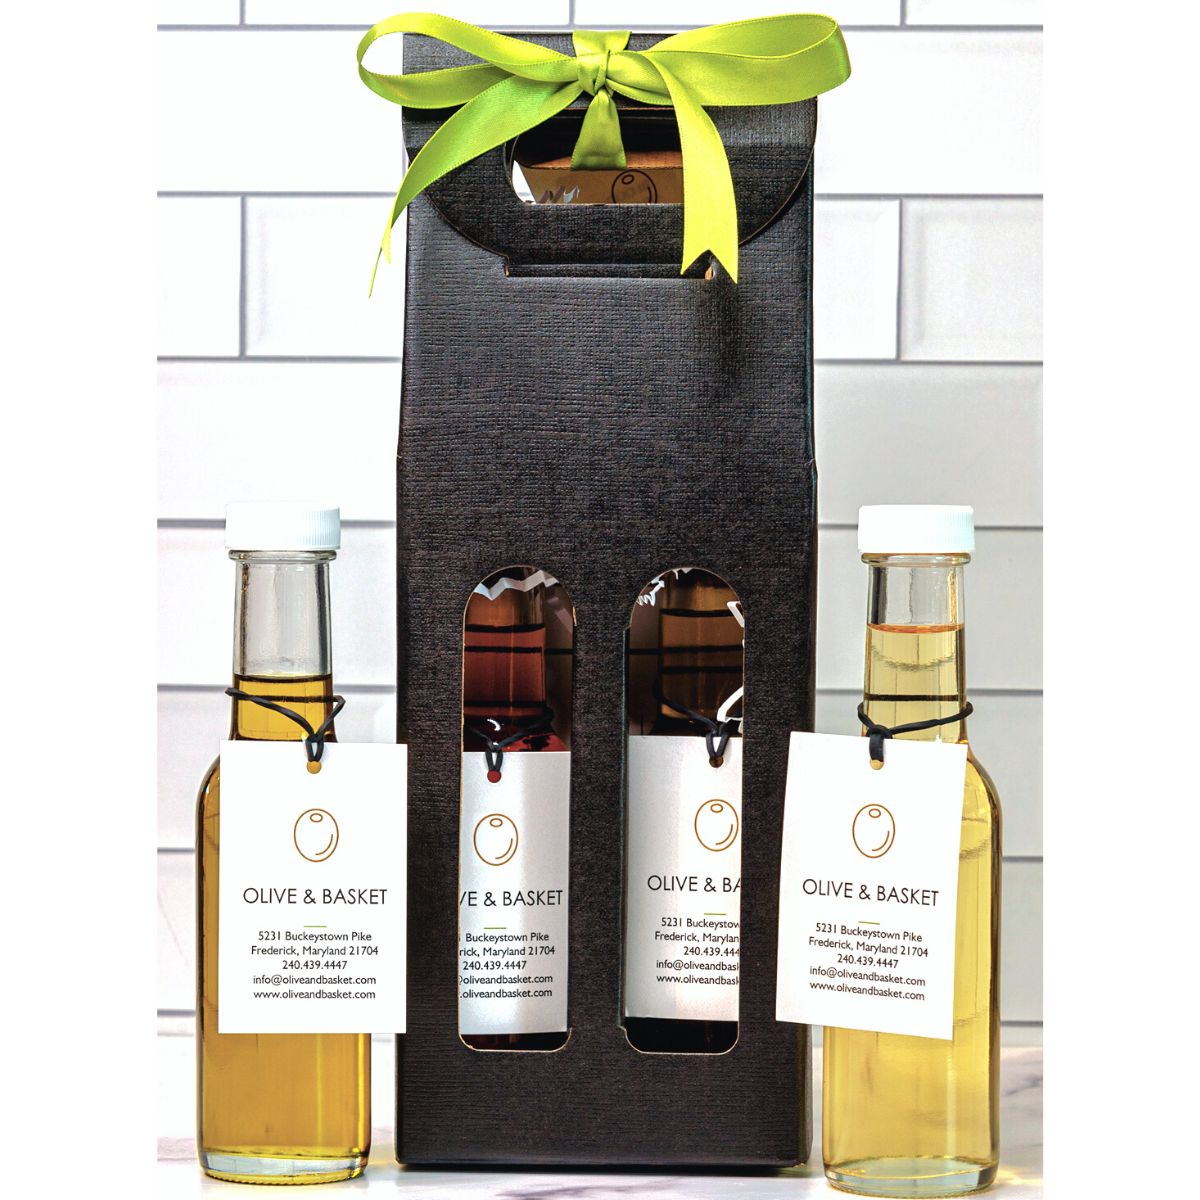 Fresh and Robust Duo Gift Box- Marc de Champagne Vinegar and Garlic Olive Oil in a Gift Box